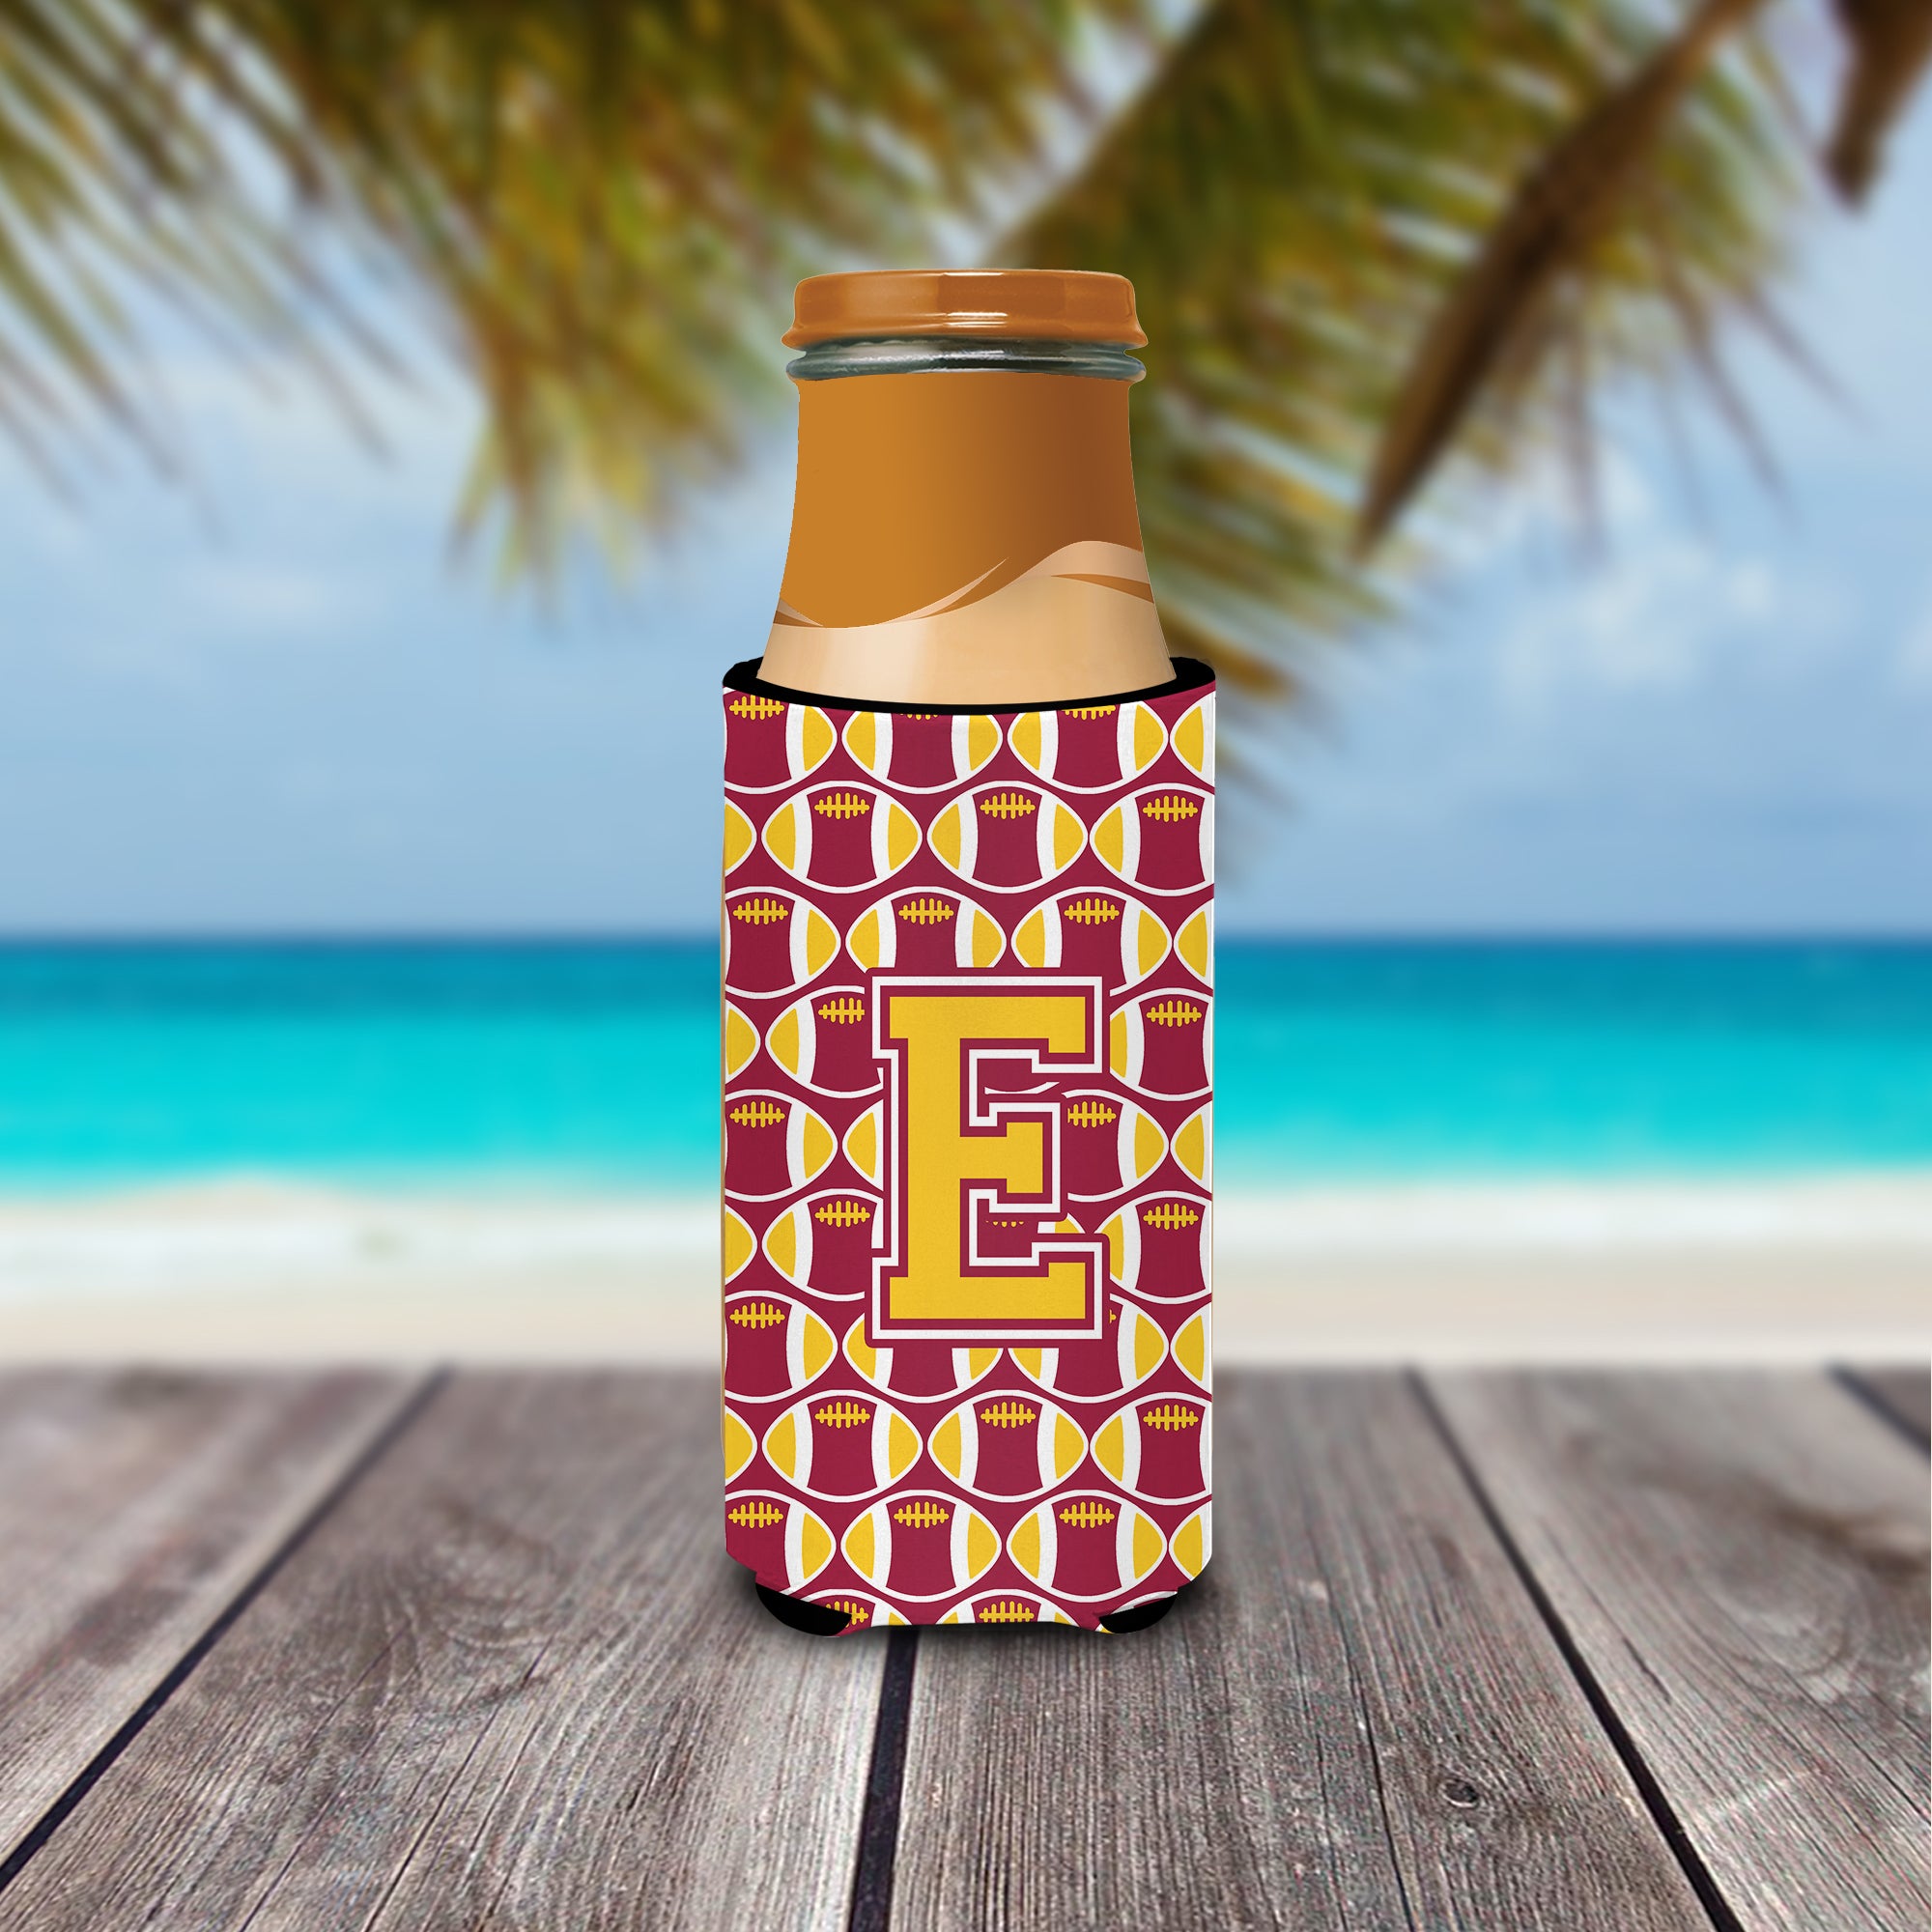 Letter E Football Maroon and Gold Ultra Beverage Insulators for slim cans CJ1081-EMUK